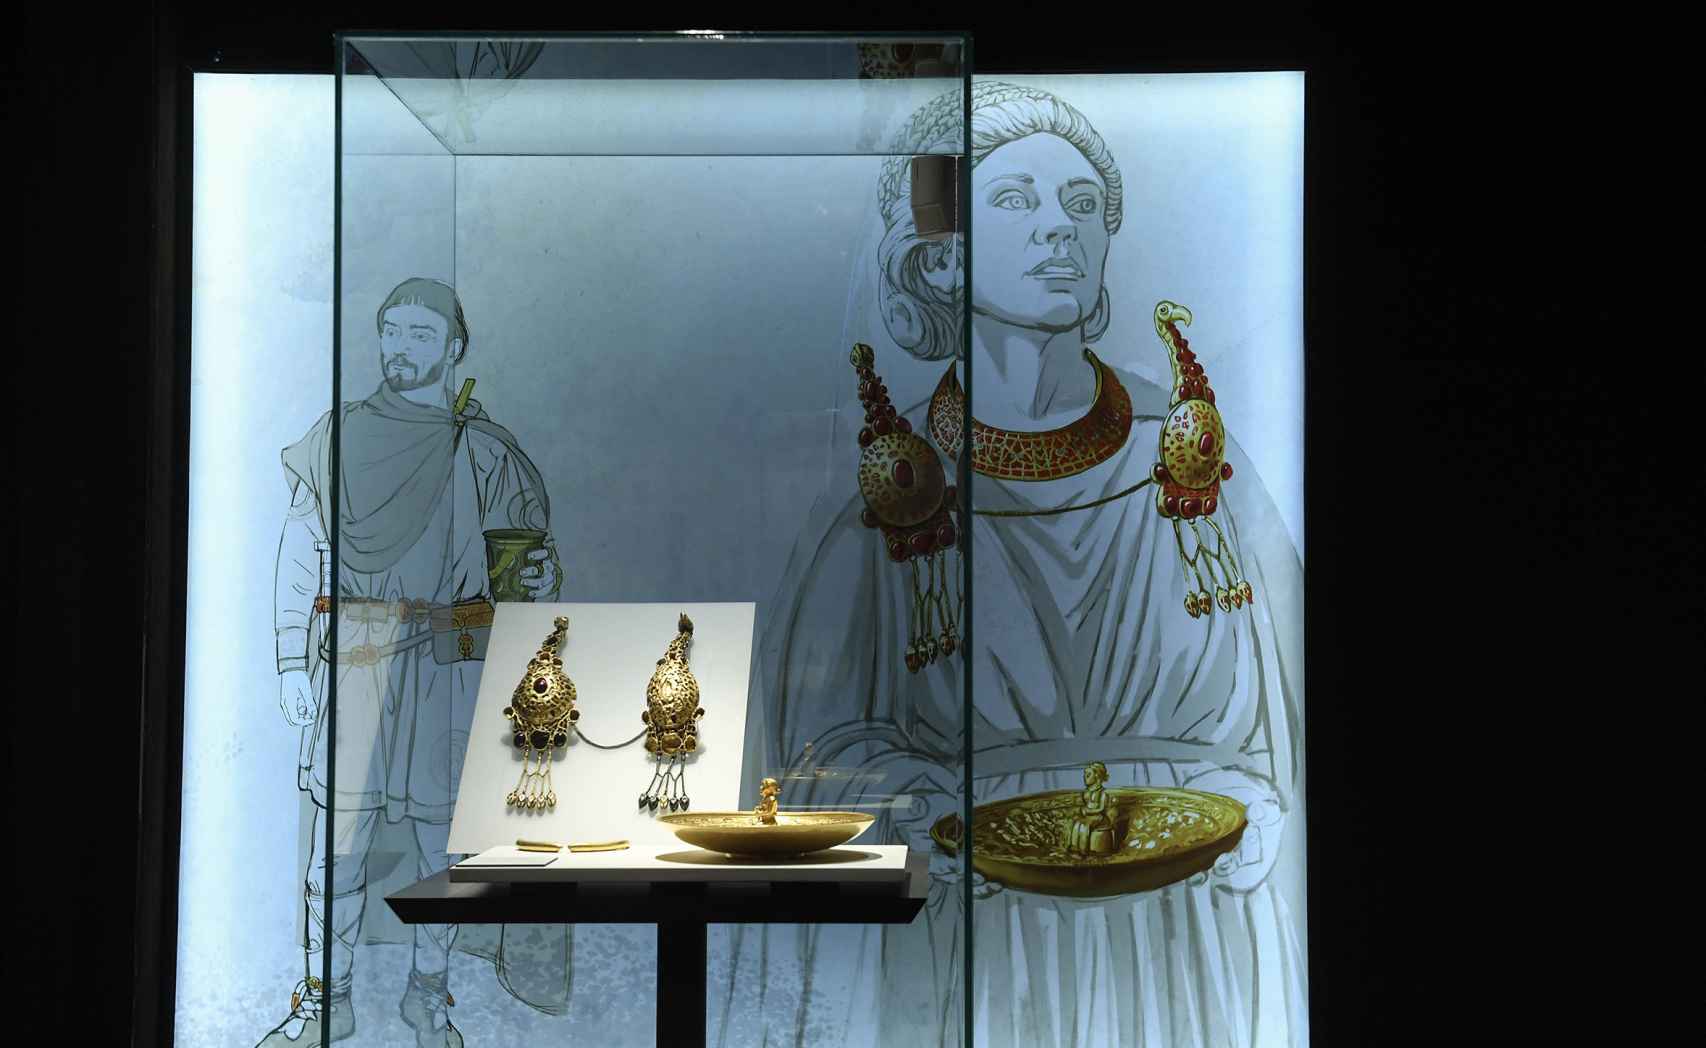 Pieces that make up the Pietroasele treasure, discovered in the Buzau district.  The illustrations in the exhibition, like the one in the image, are the work of the Romanian artist Radu Oltean, author of 'Dacia.  The Roman conquest '(Desperta-Ferro)